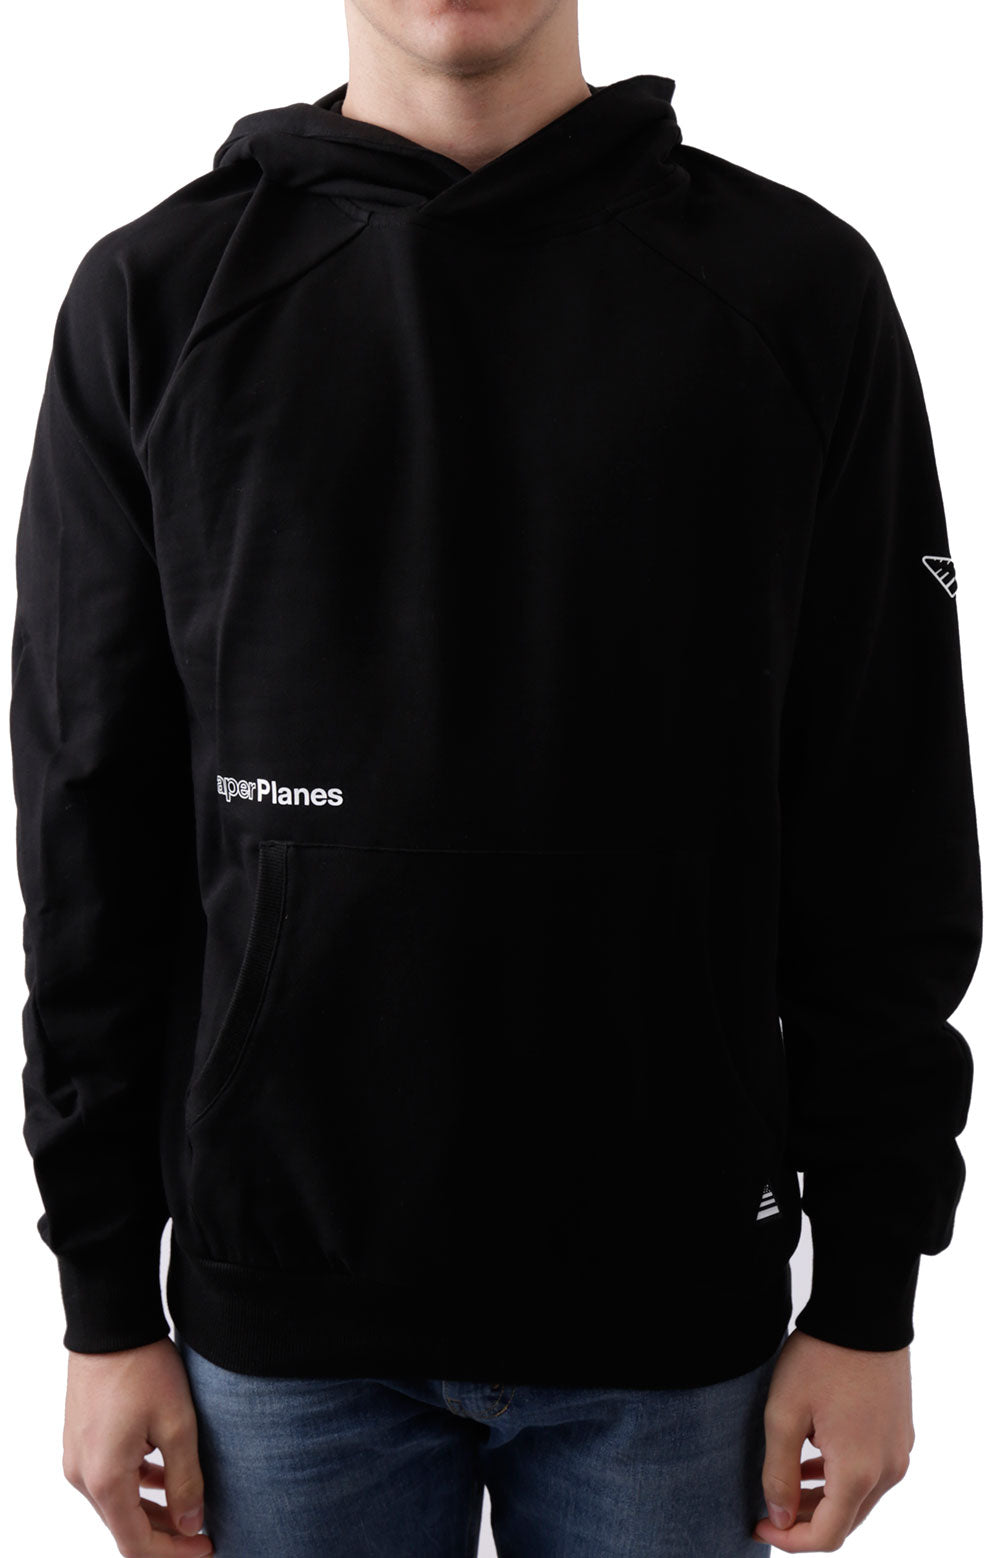 Dreamers State Of Mind Pullover Hoodie